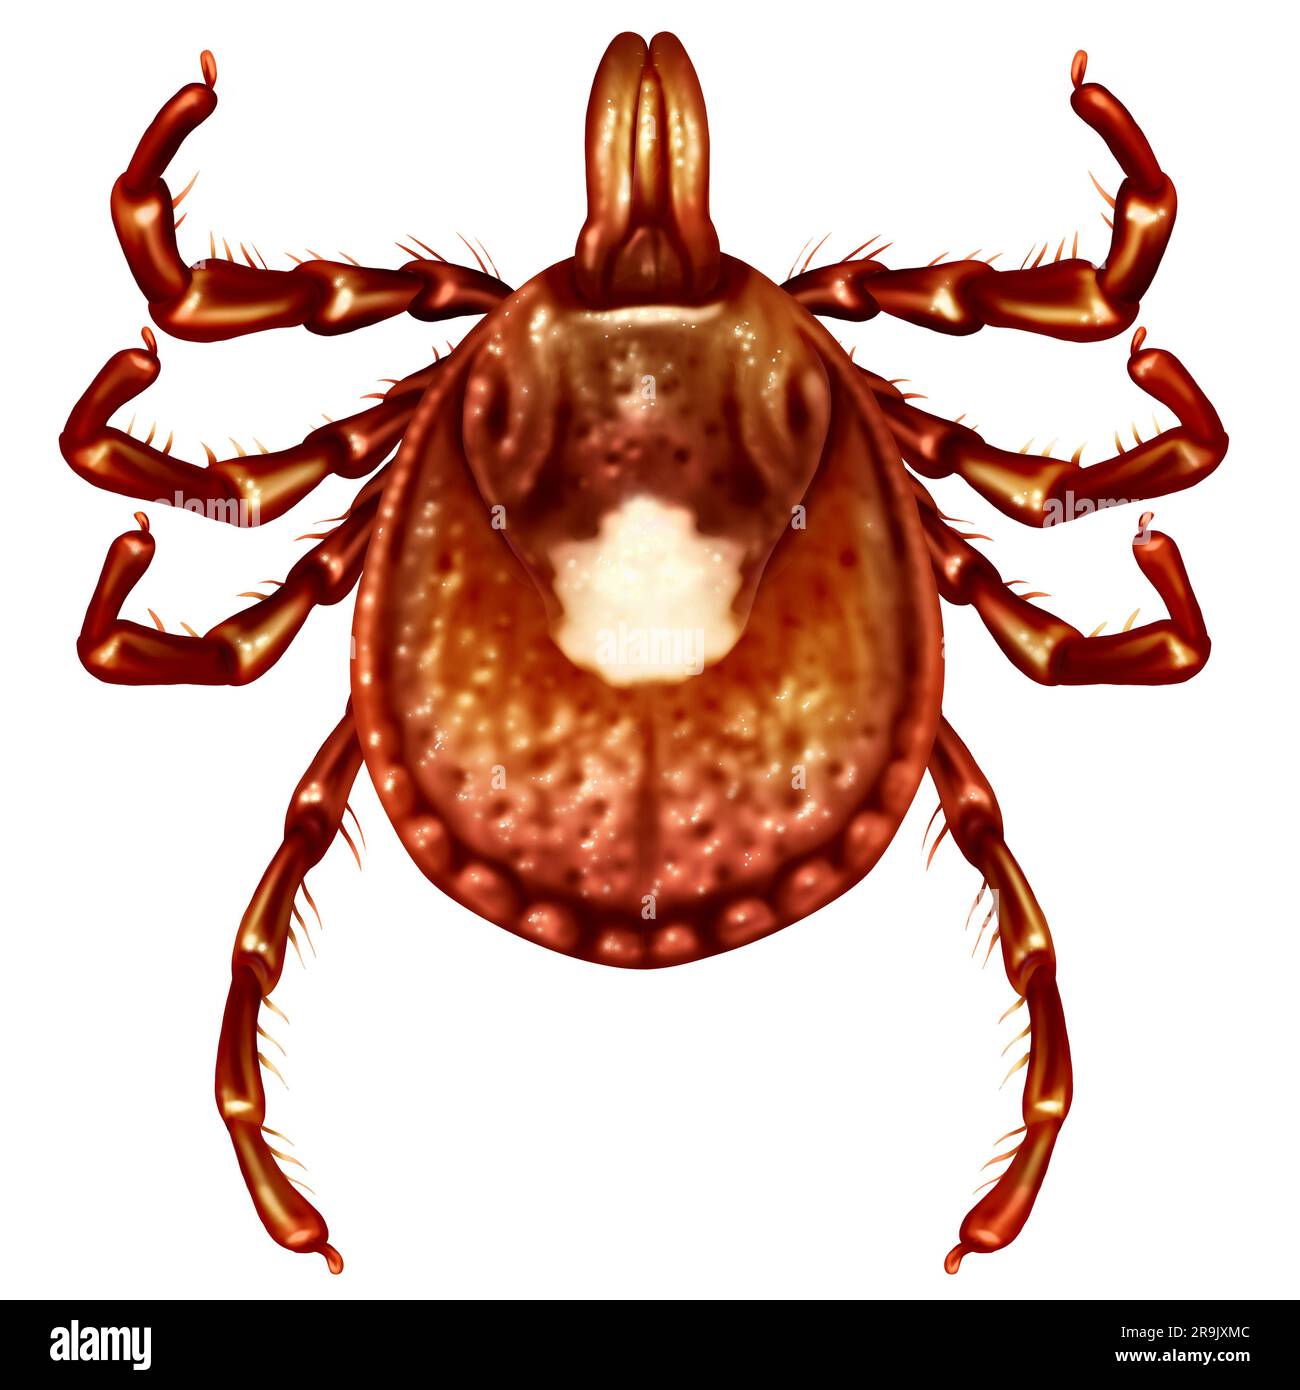 Lone Star Tick female adult insect close up illustration isolated on a white background as a symbol of a parasite arachnid that sucks blood Stock Photo